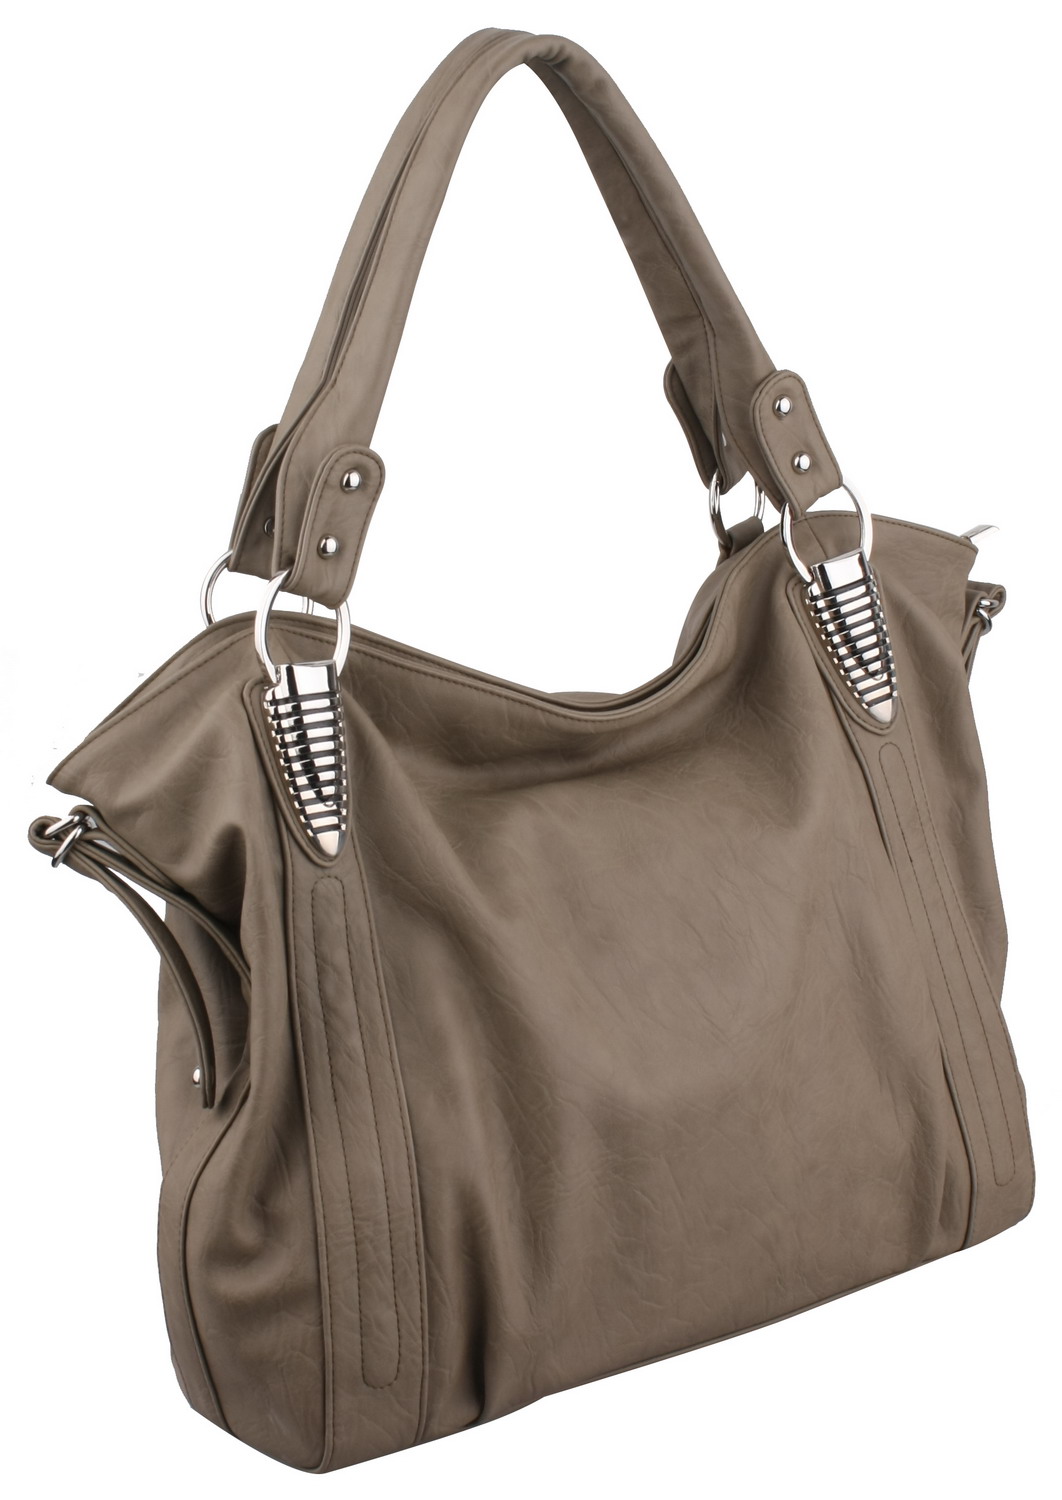 Infomation Point: Ladies Bags Styles